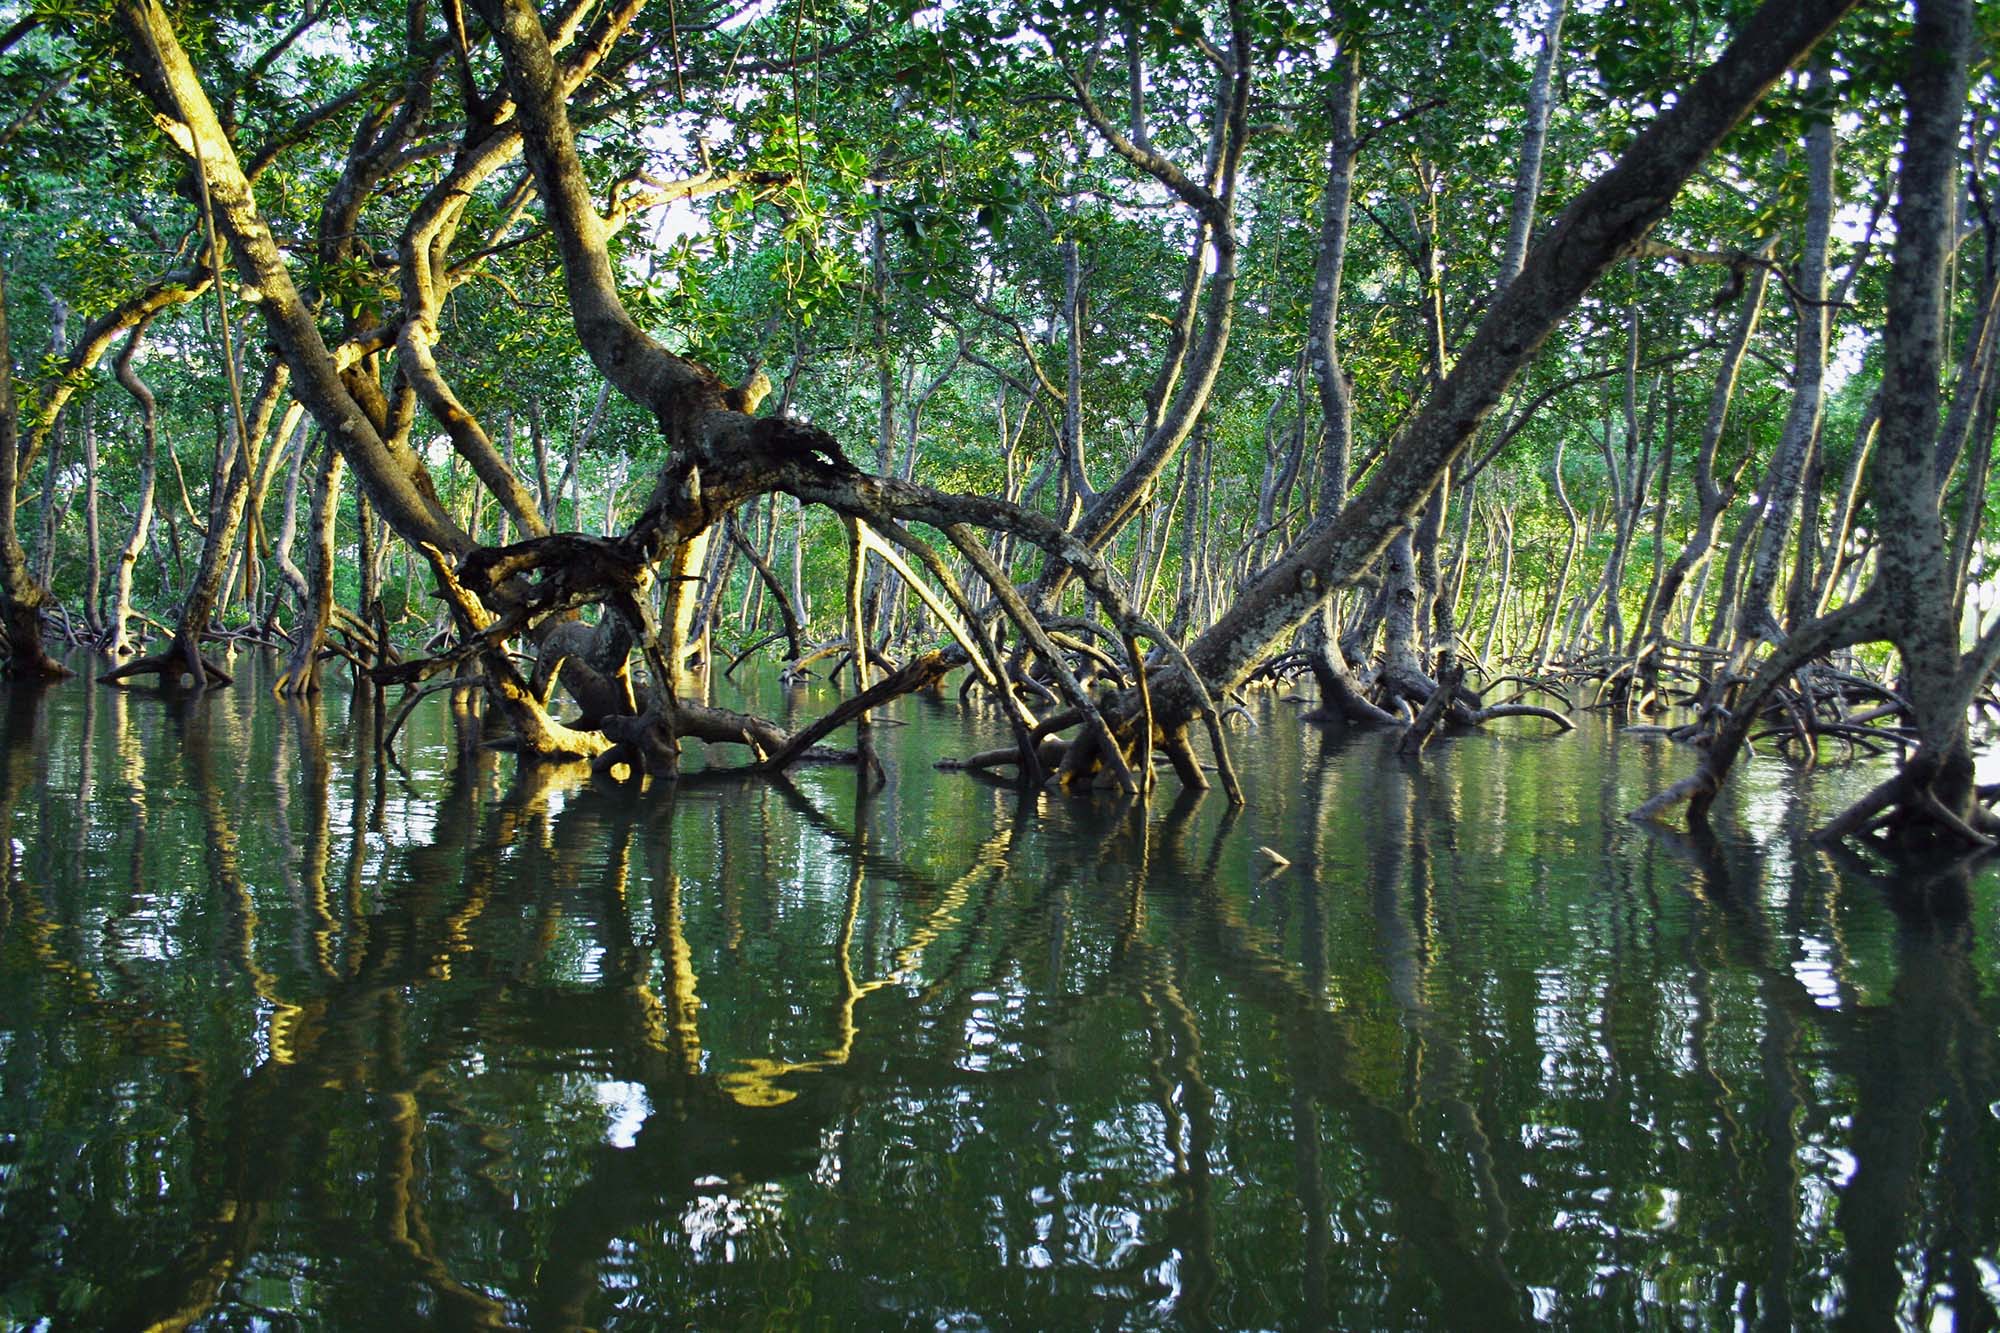 A mangrove forest with water below